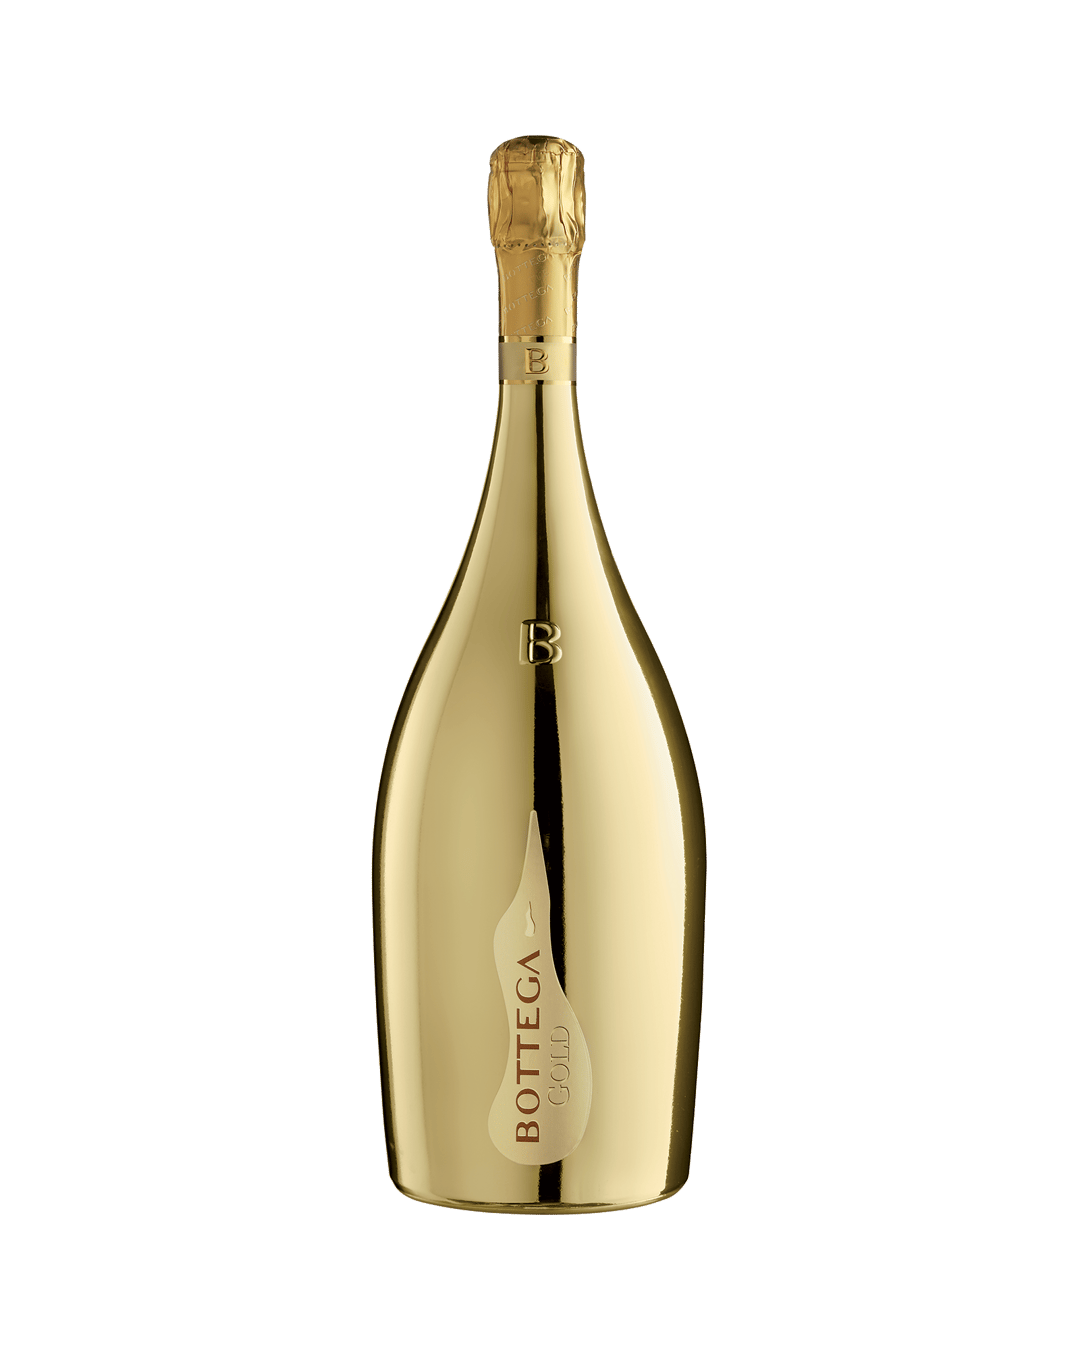 Buy Belvino Rose Prosecco online with (same-day FREE delivery*) in ...